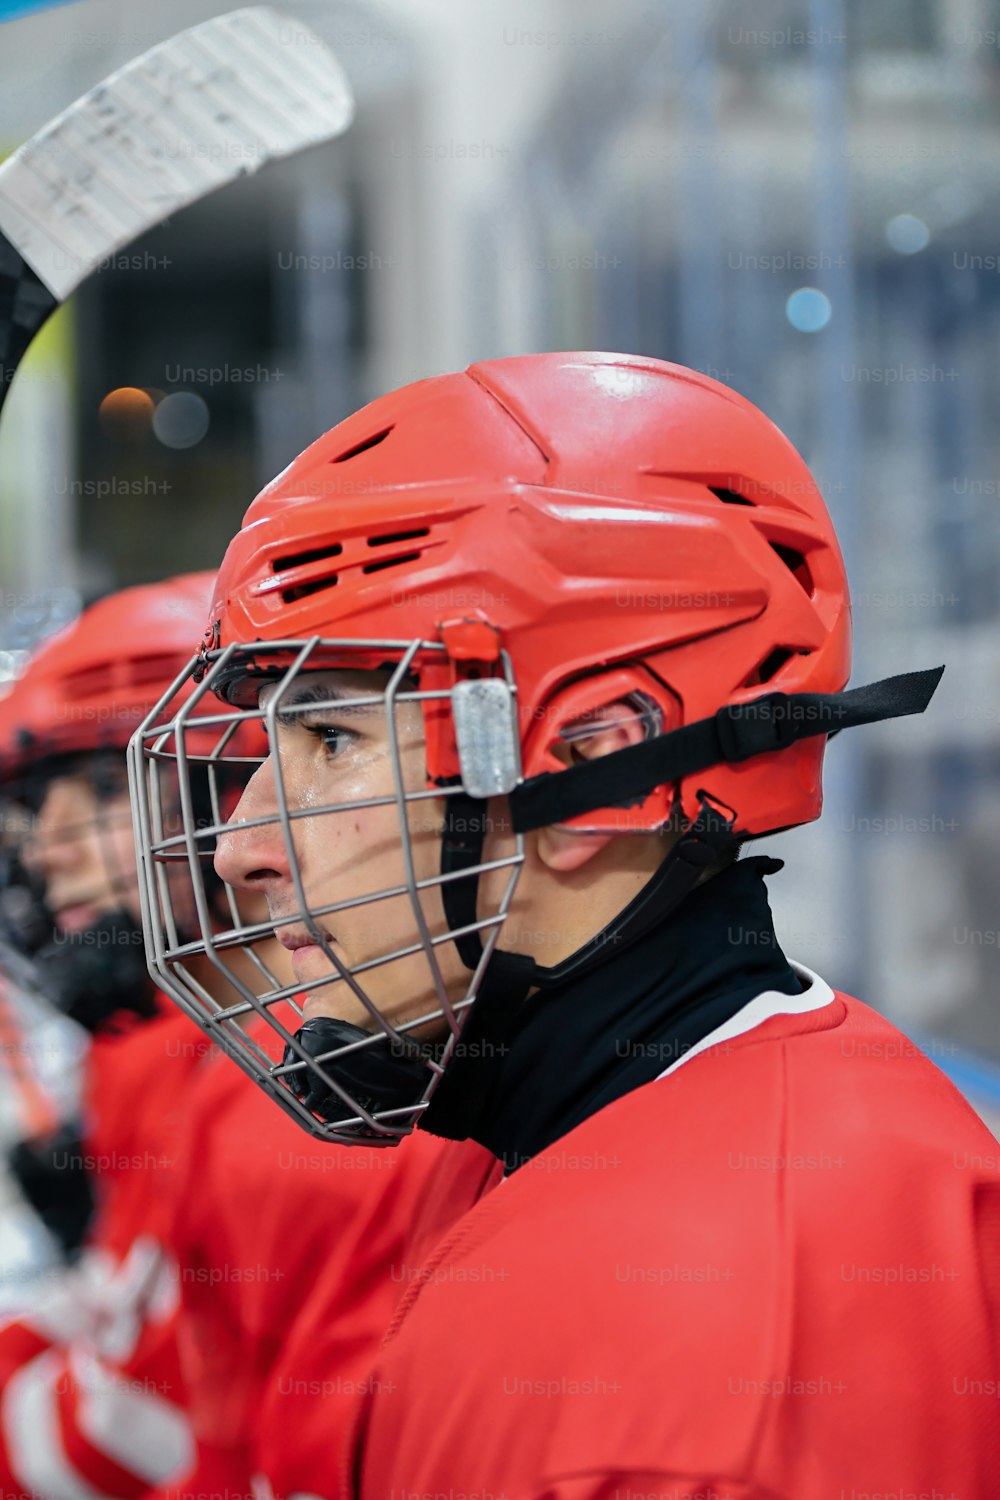 a hockey player wearing a red helmet and holding a hockey stick